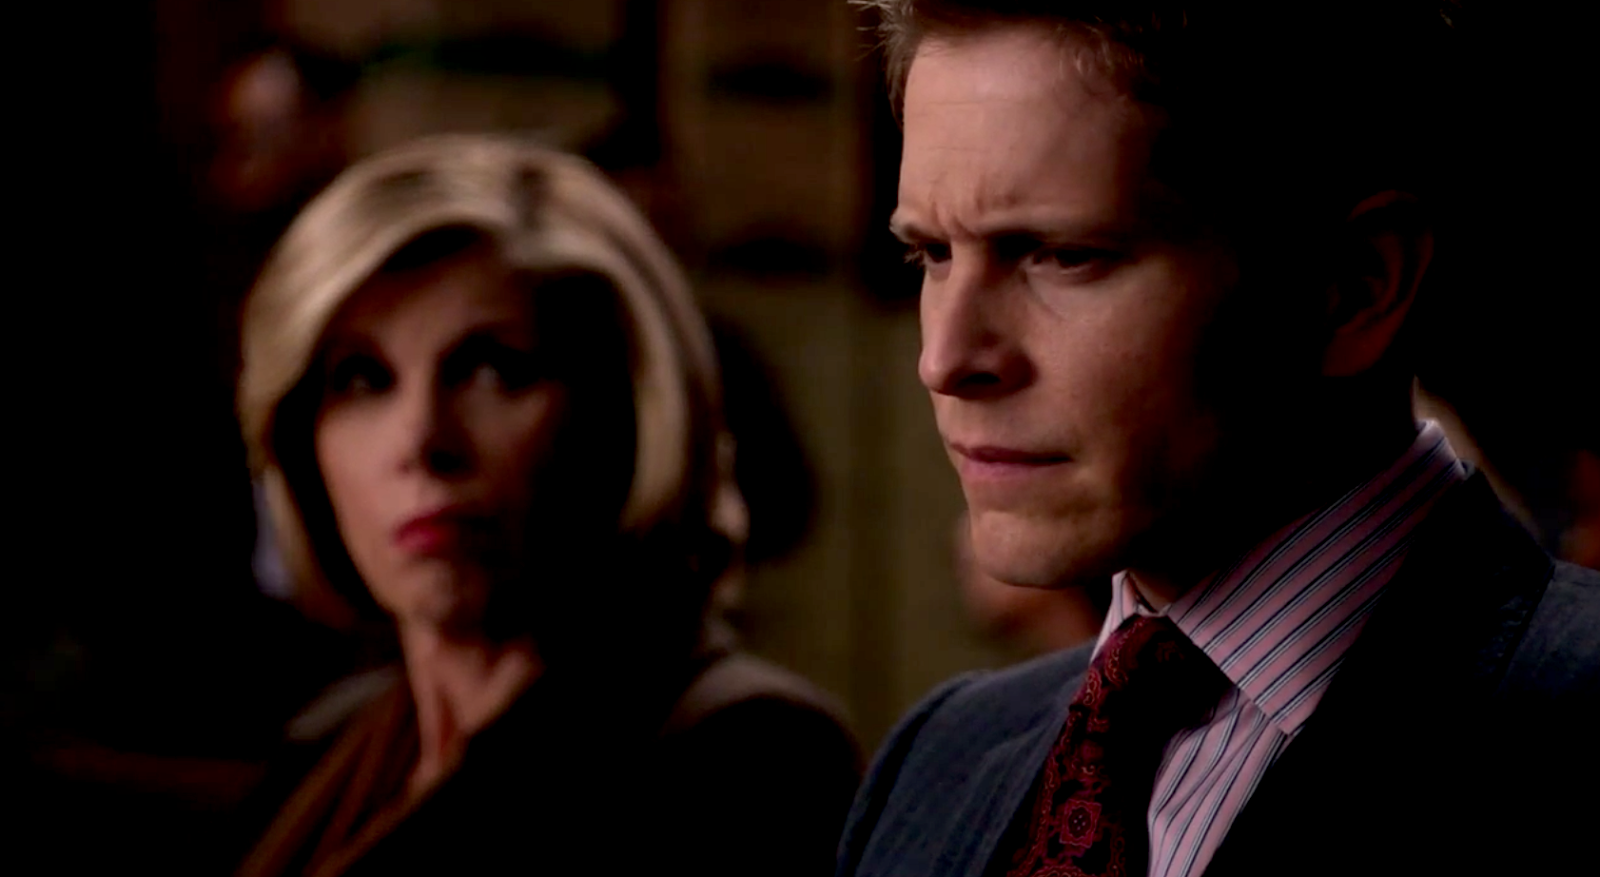 The Good Wife - Message Discipline - Review - "Cary, They Are Crucifying You"